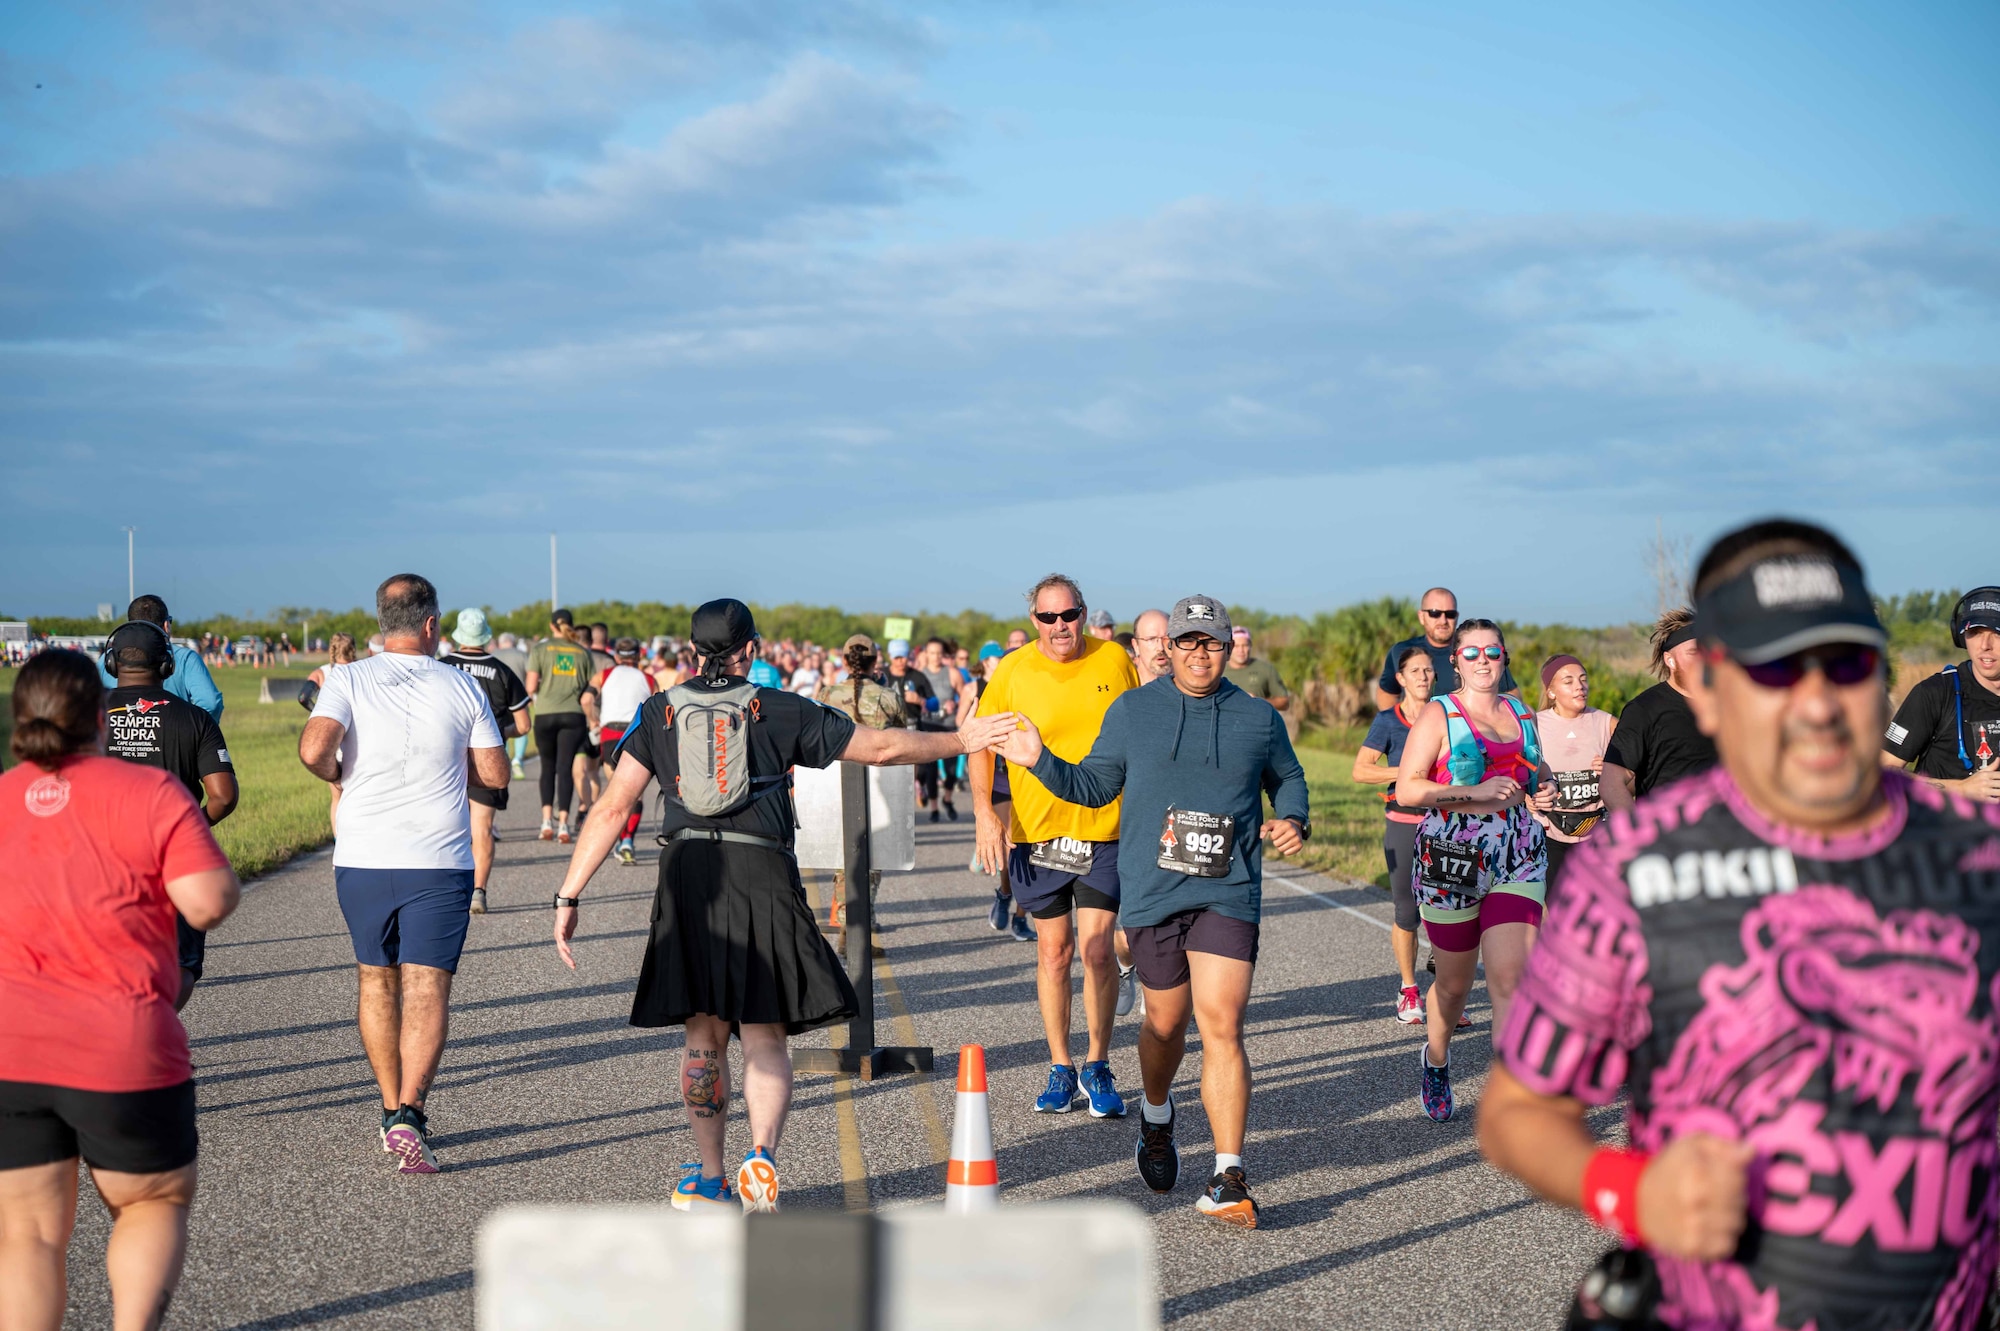 Participants in the Space Force T-Minus 10-Miler run at Cape Canaveral Space Force Station, Florida, Dec. 9, 2023. The T-Minus 10-Miler celebrates the Space Forces birthday. (U.S. Space Force photo by Senior Airman Samuel Becker)